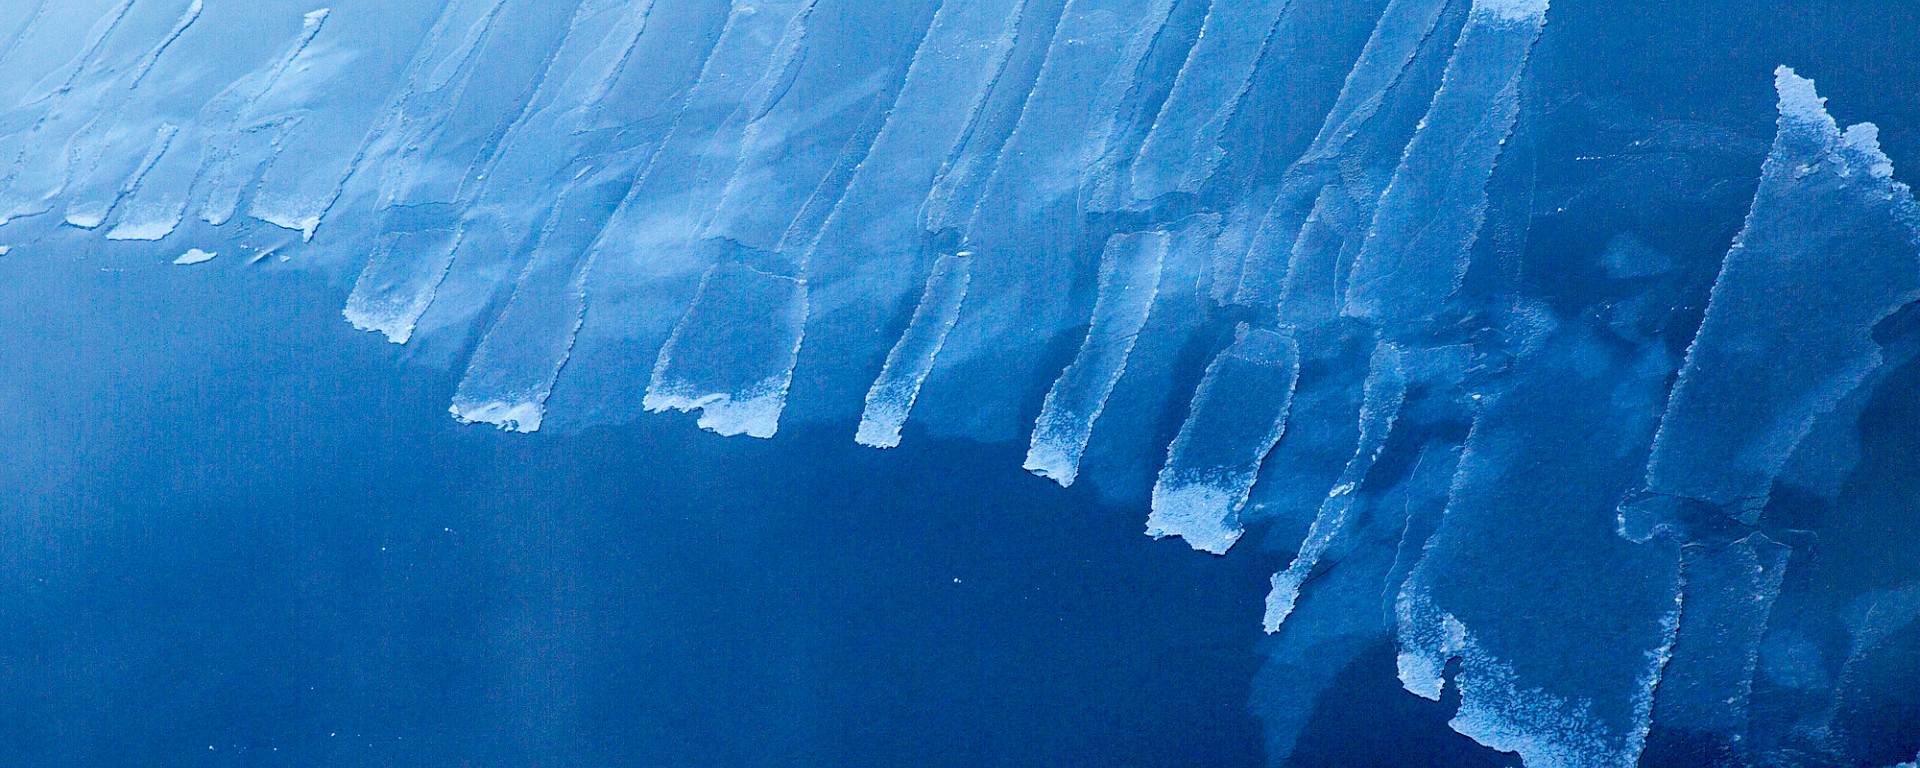 Fingers of thin nilas ice covering dark blue water viewed from the air